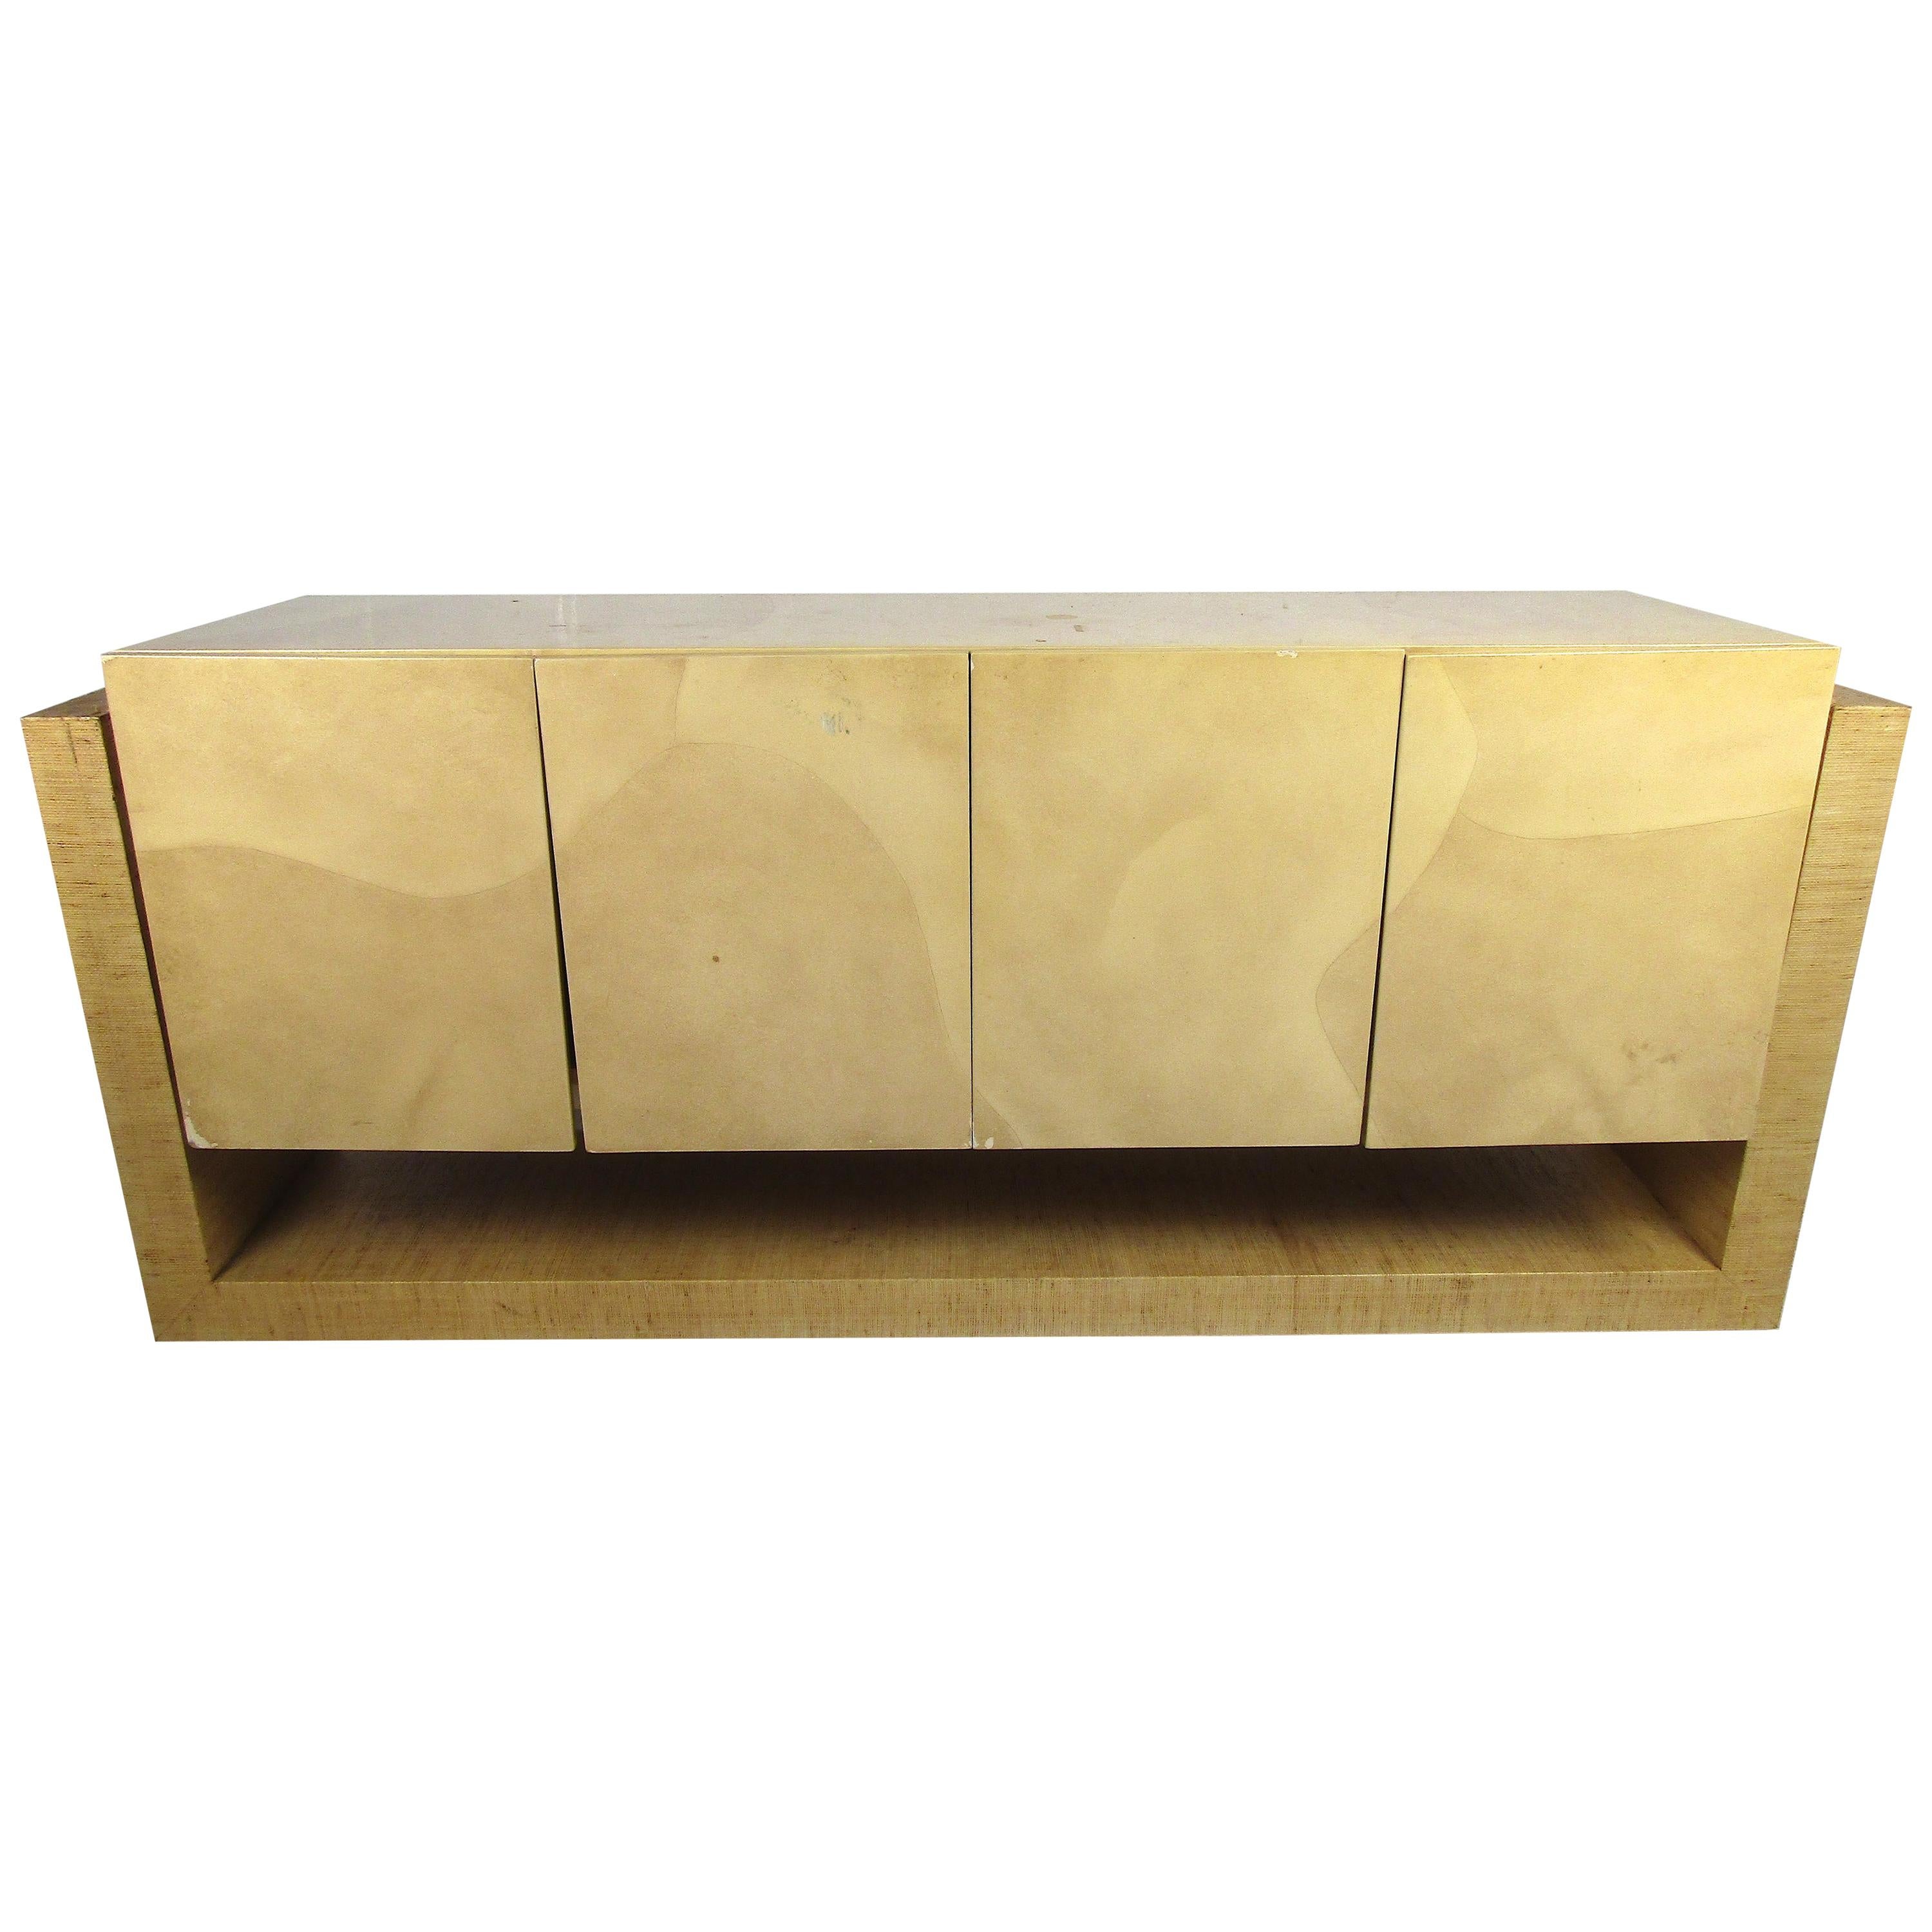 A beautiful vintage modern sideboard with a grasscloth base holding a lacquered goatskin credenza. A unique and efficient design in the style of Karl Springer. The unusual design offers an additional lower shelf for storage. Four cabinet doors hide